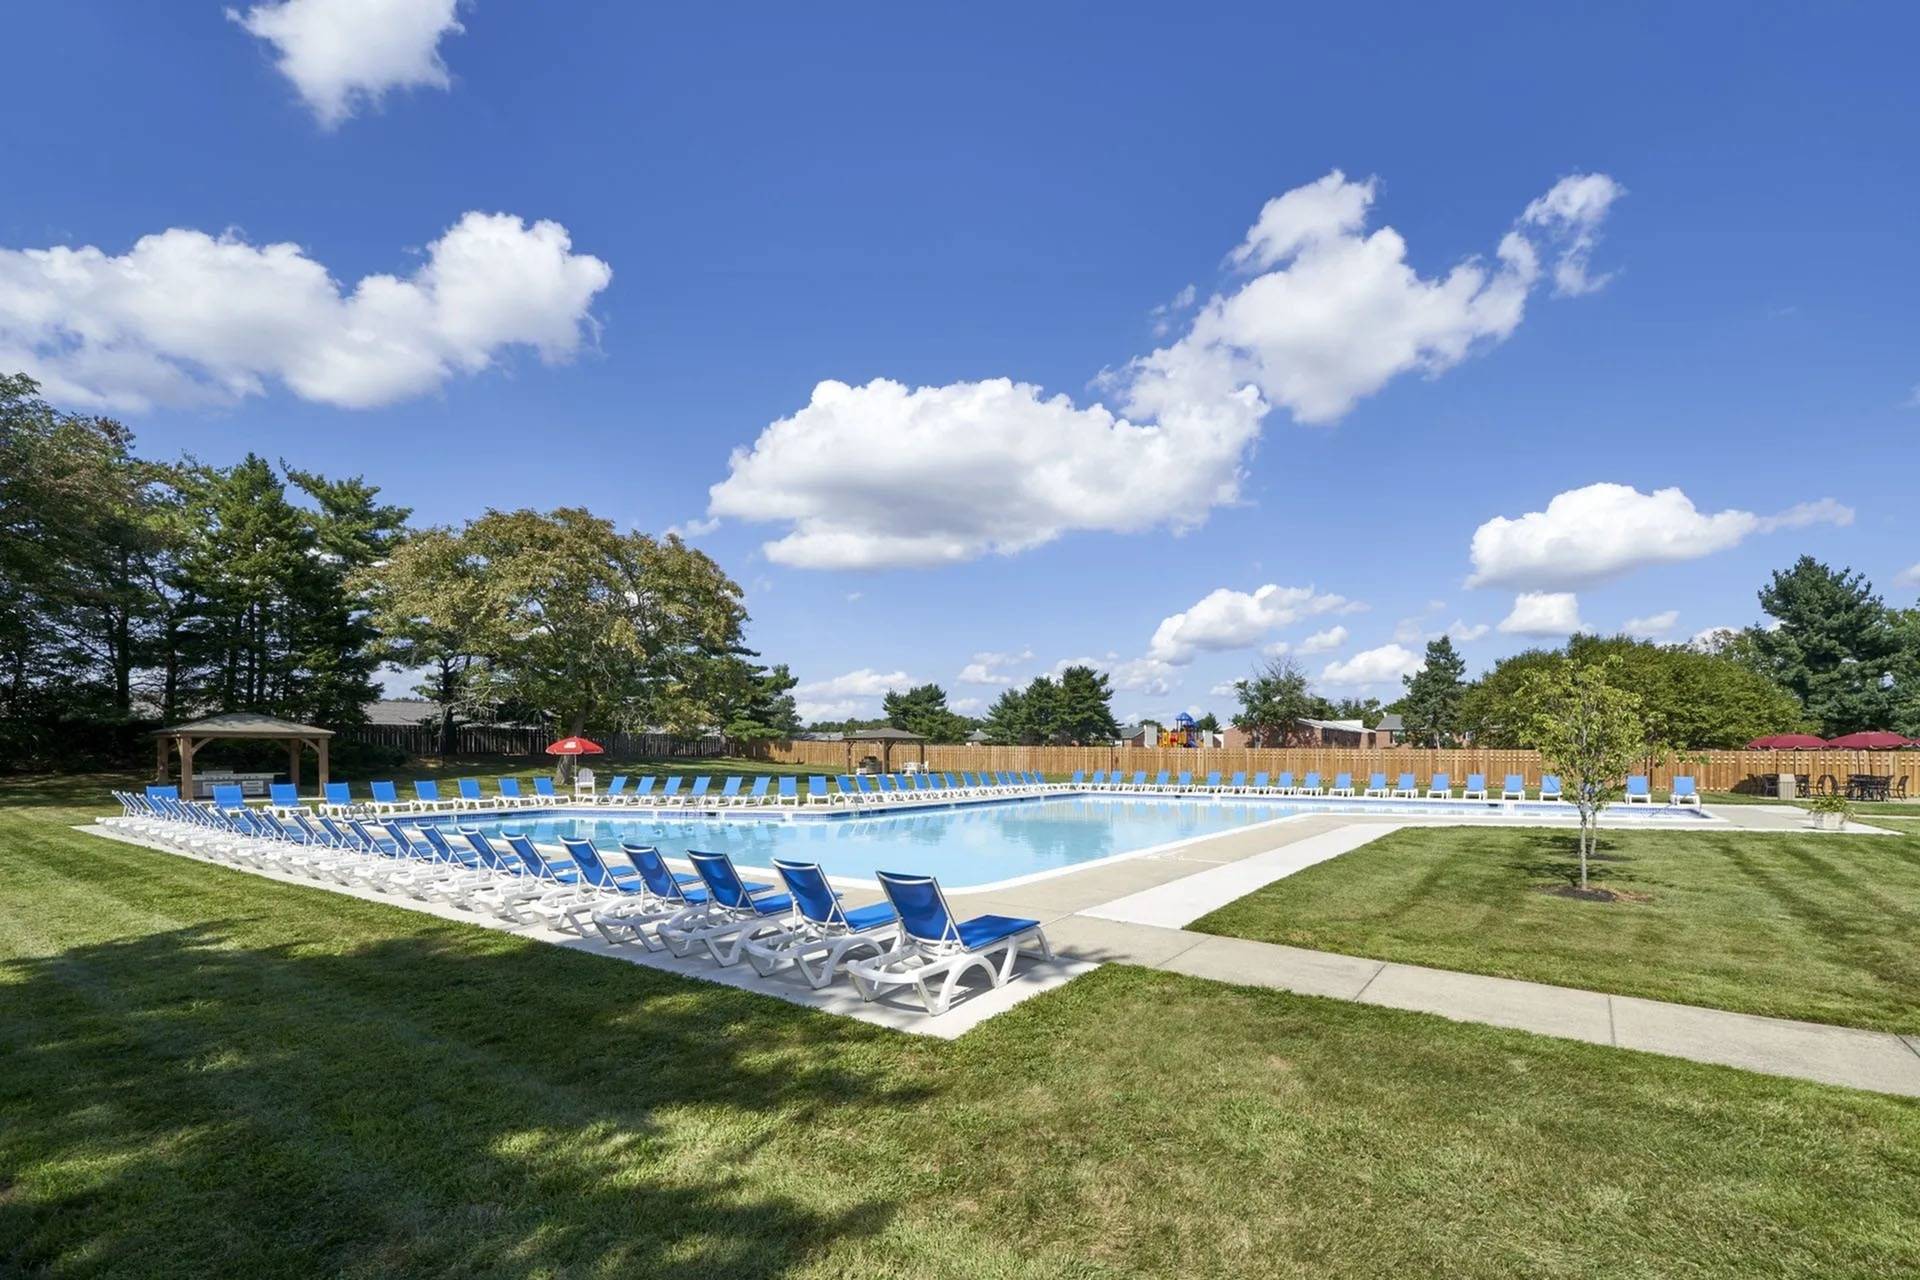 Bensalem PA Apartments - Village Square - A Huge Pool Area With Dozens Of Lounge Chairs Surrounding The Large Pool With A Hottub In The Distance And Beautiful Green Lawn All Around